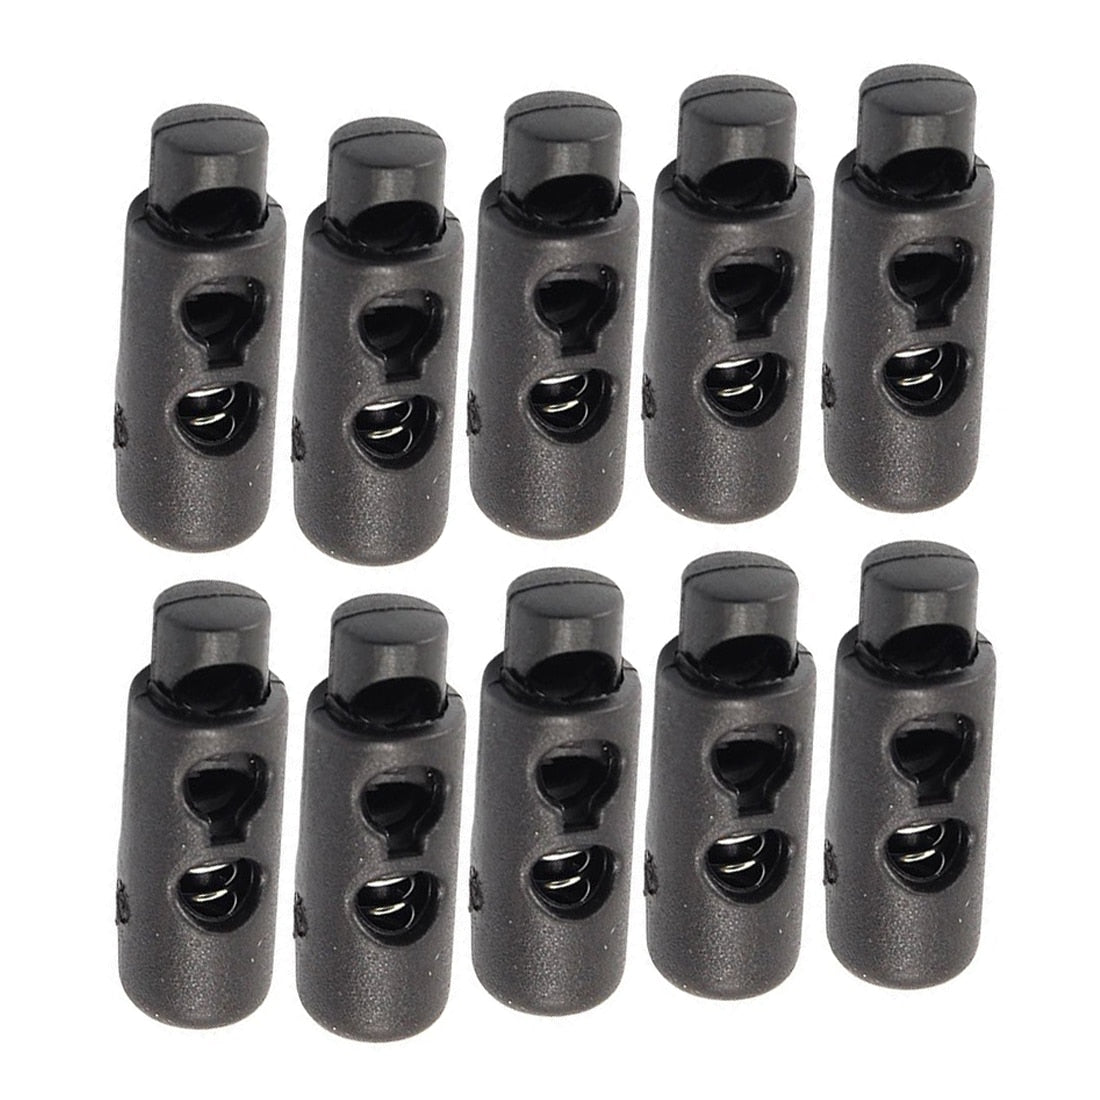 Hot Style10 x Plastic Barrel Cylinder Stoppers Toggle Cord Locks Black - ebowsos